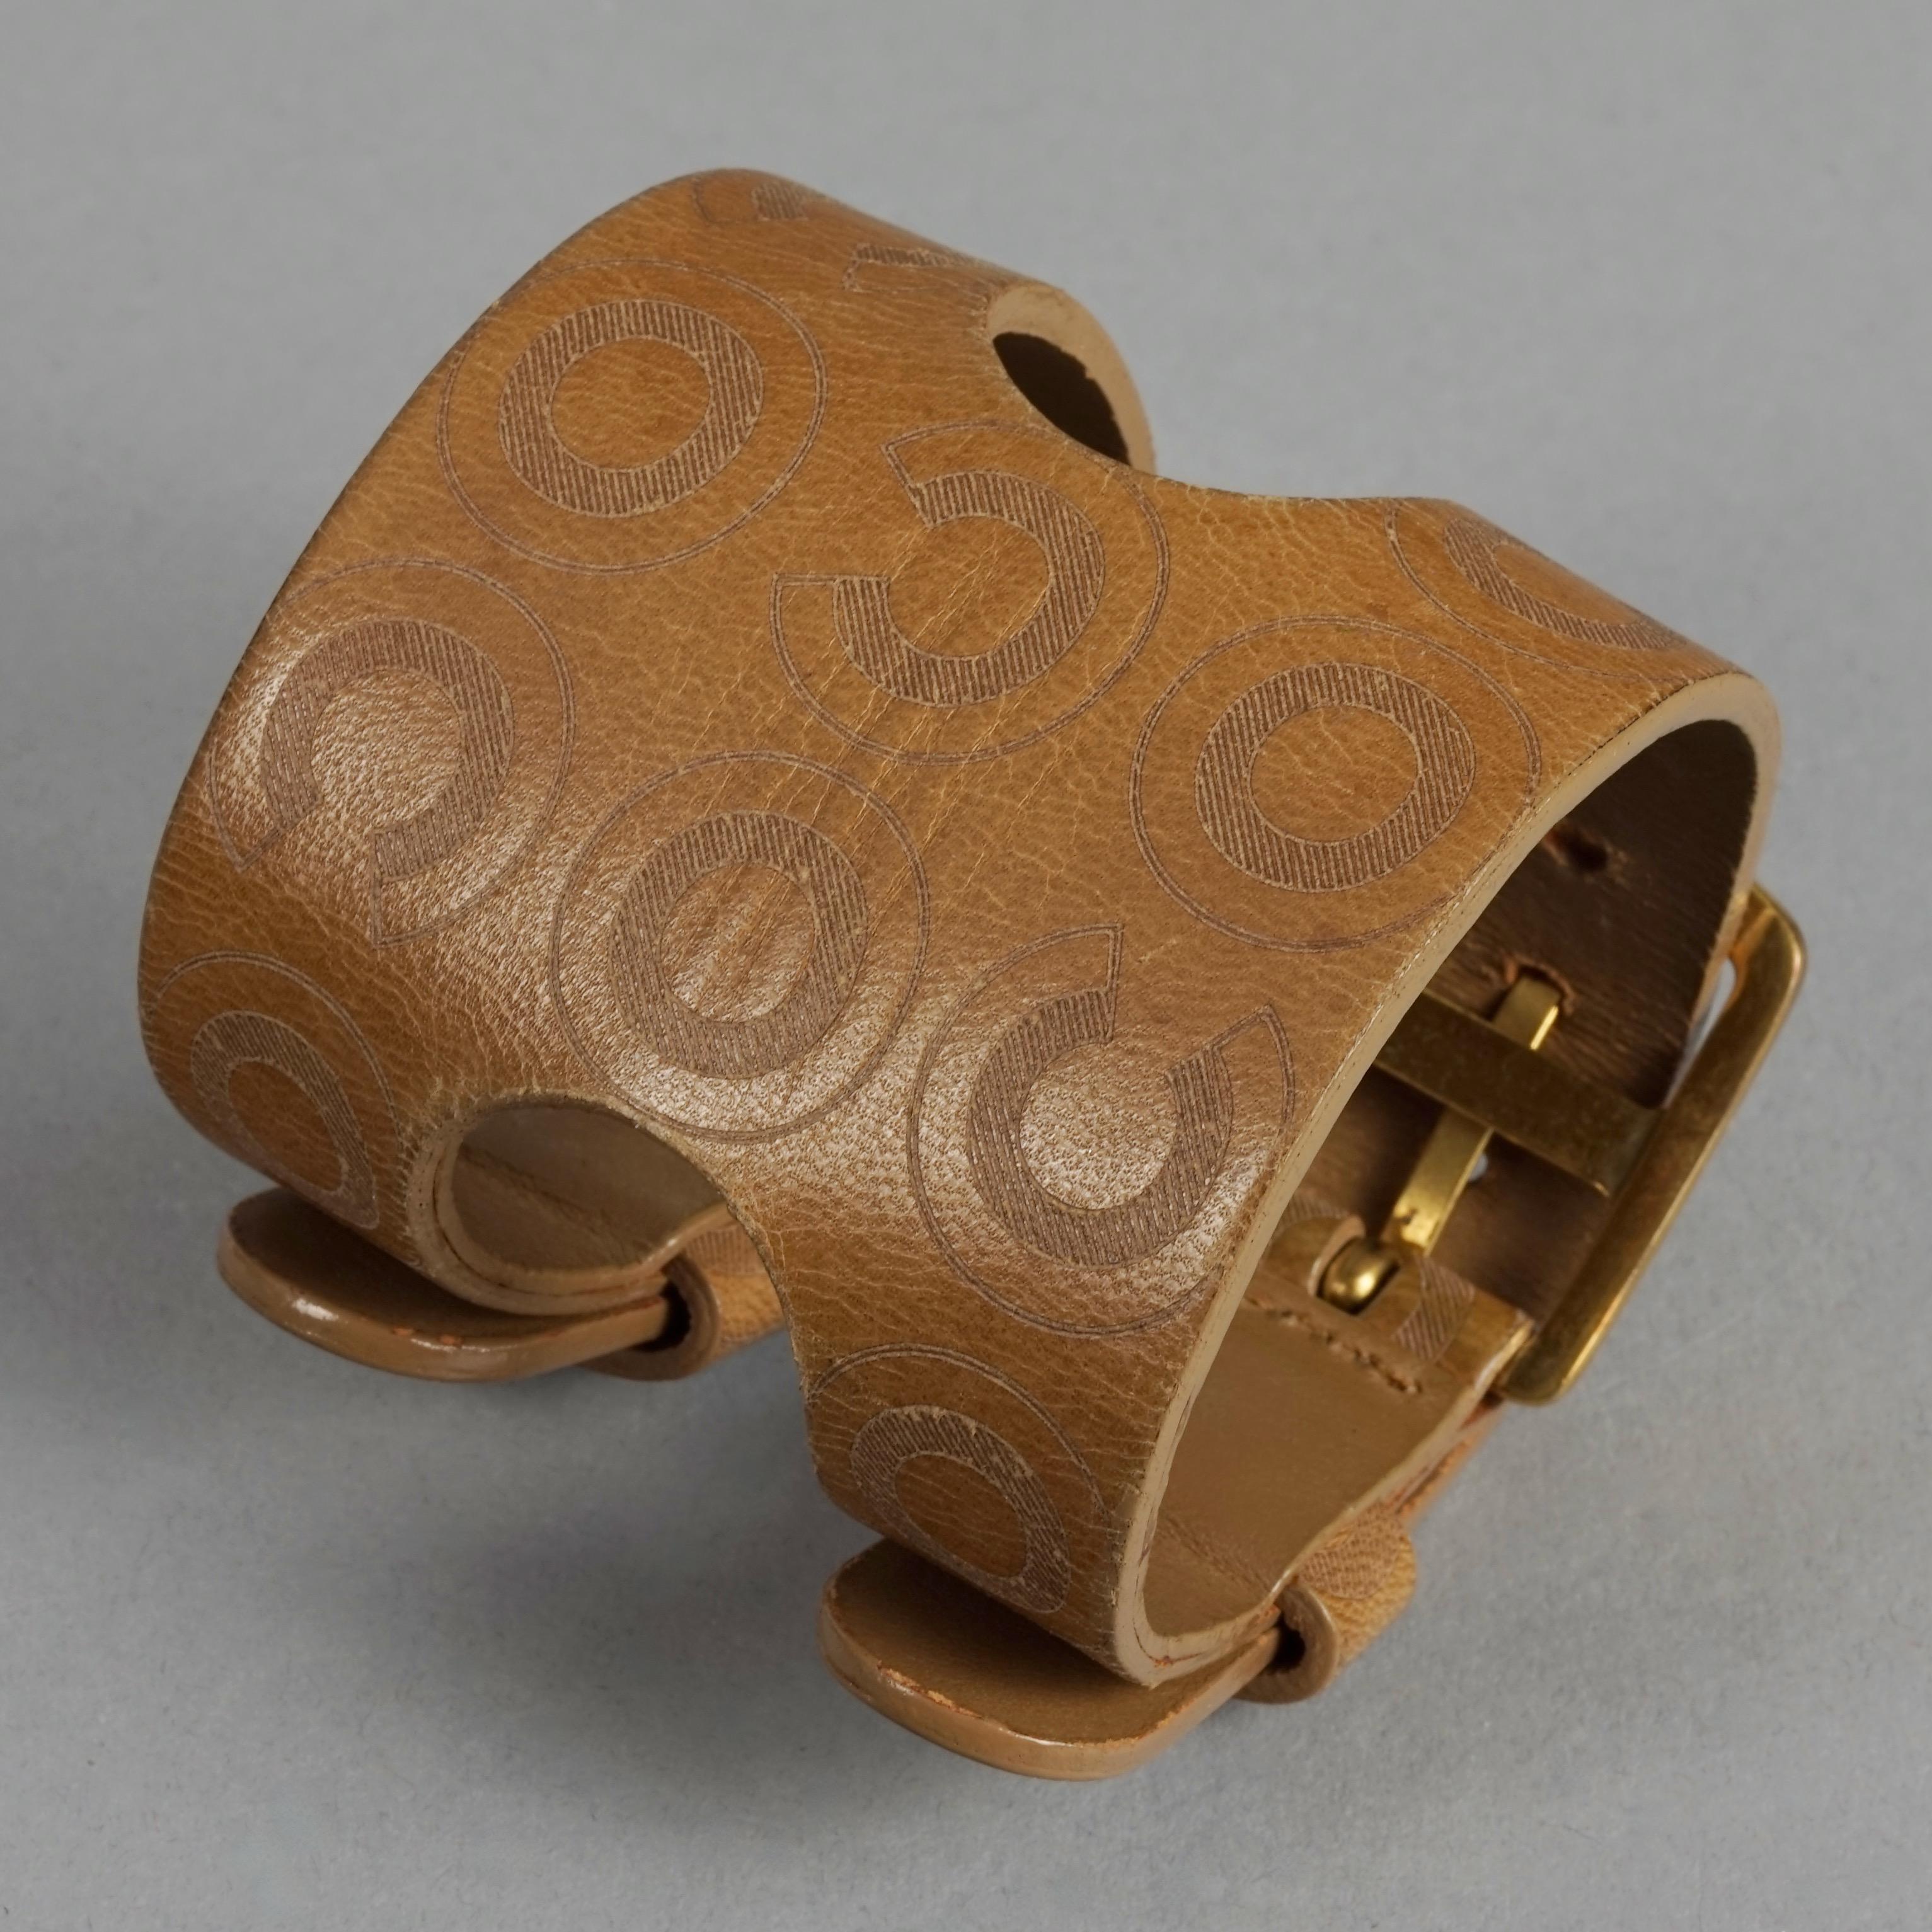 Vintage 2001 COCO CHANEL Double Buckle Brown Leather Cuff Bracelet In Good Condition For Sale In Kingersheim, Alsace